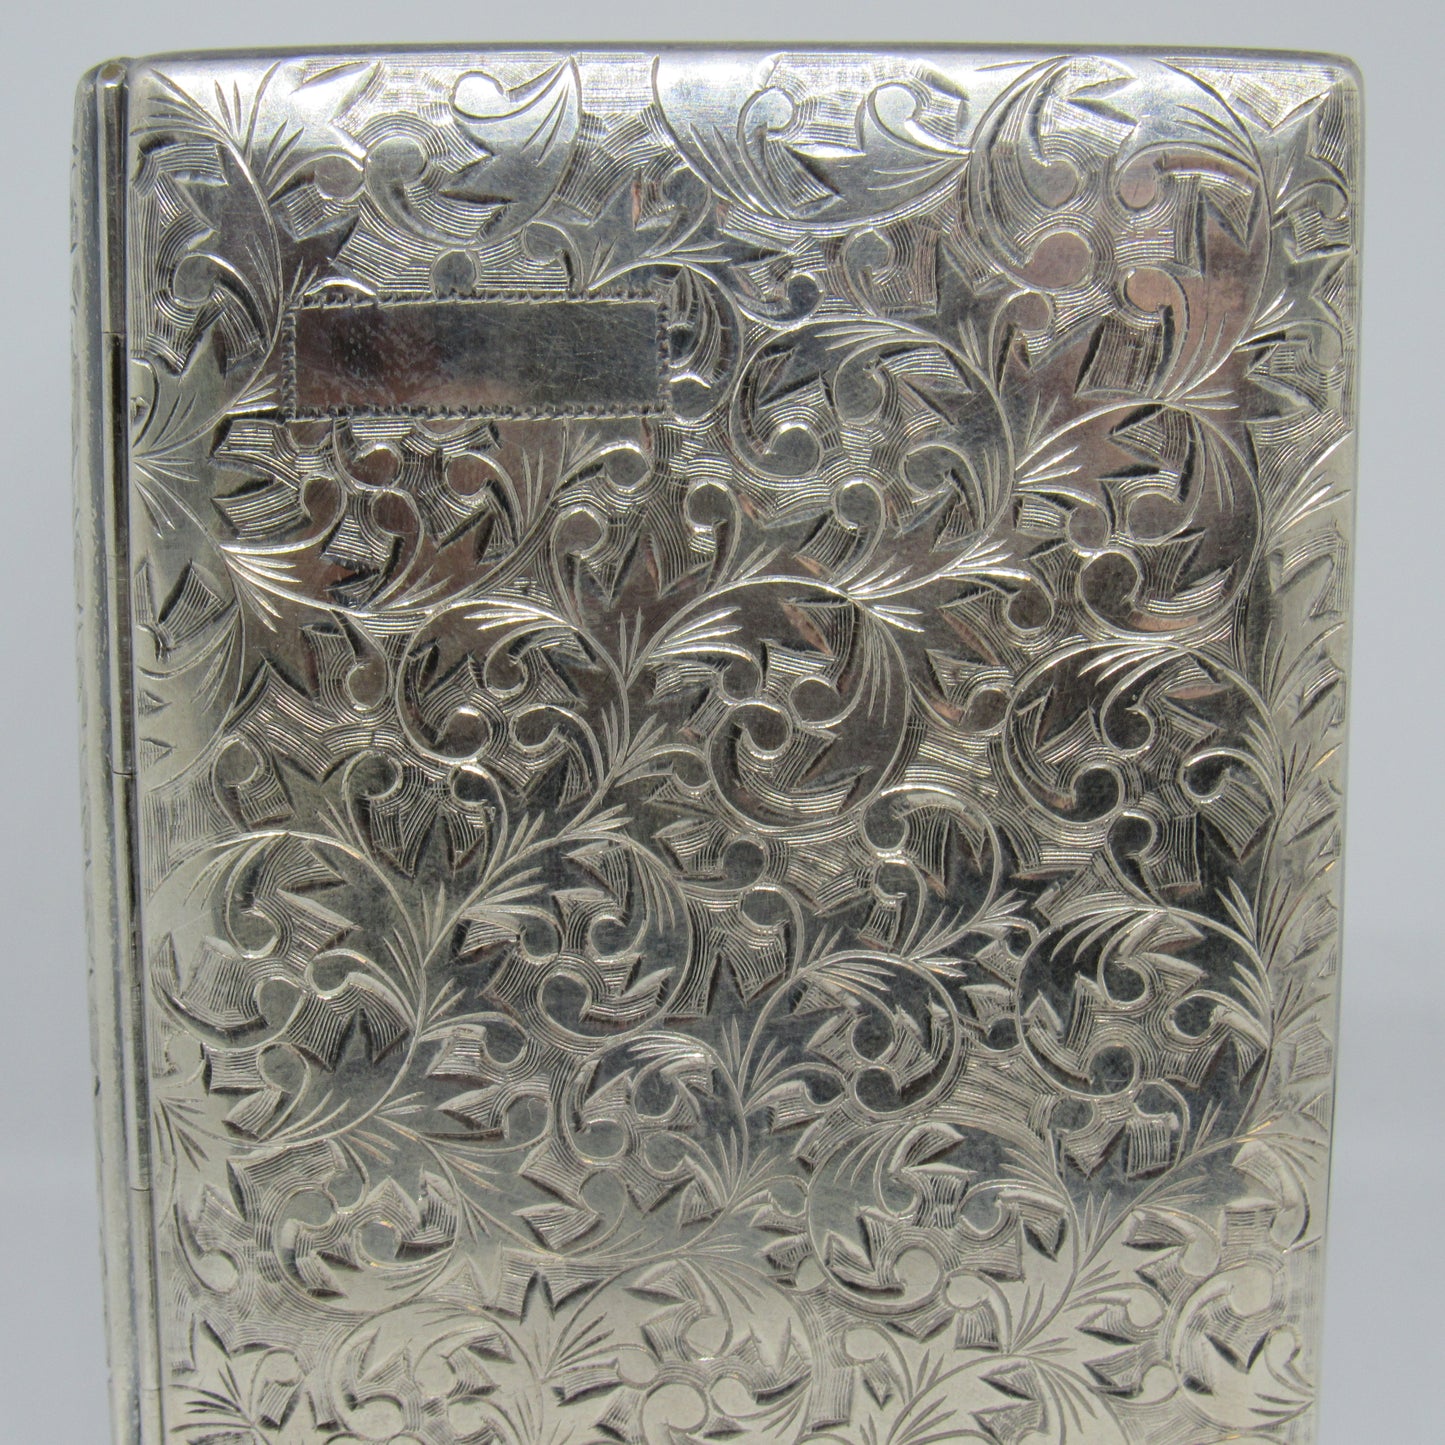 Vintage Sterling Silver 950 Engraved Cigarette Case No Mono - 5 in x 3.25 in